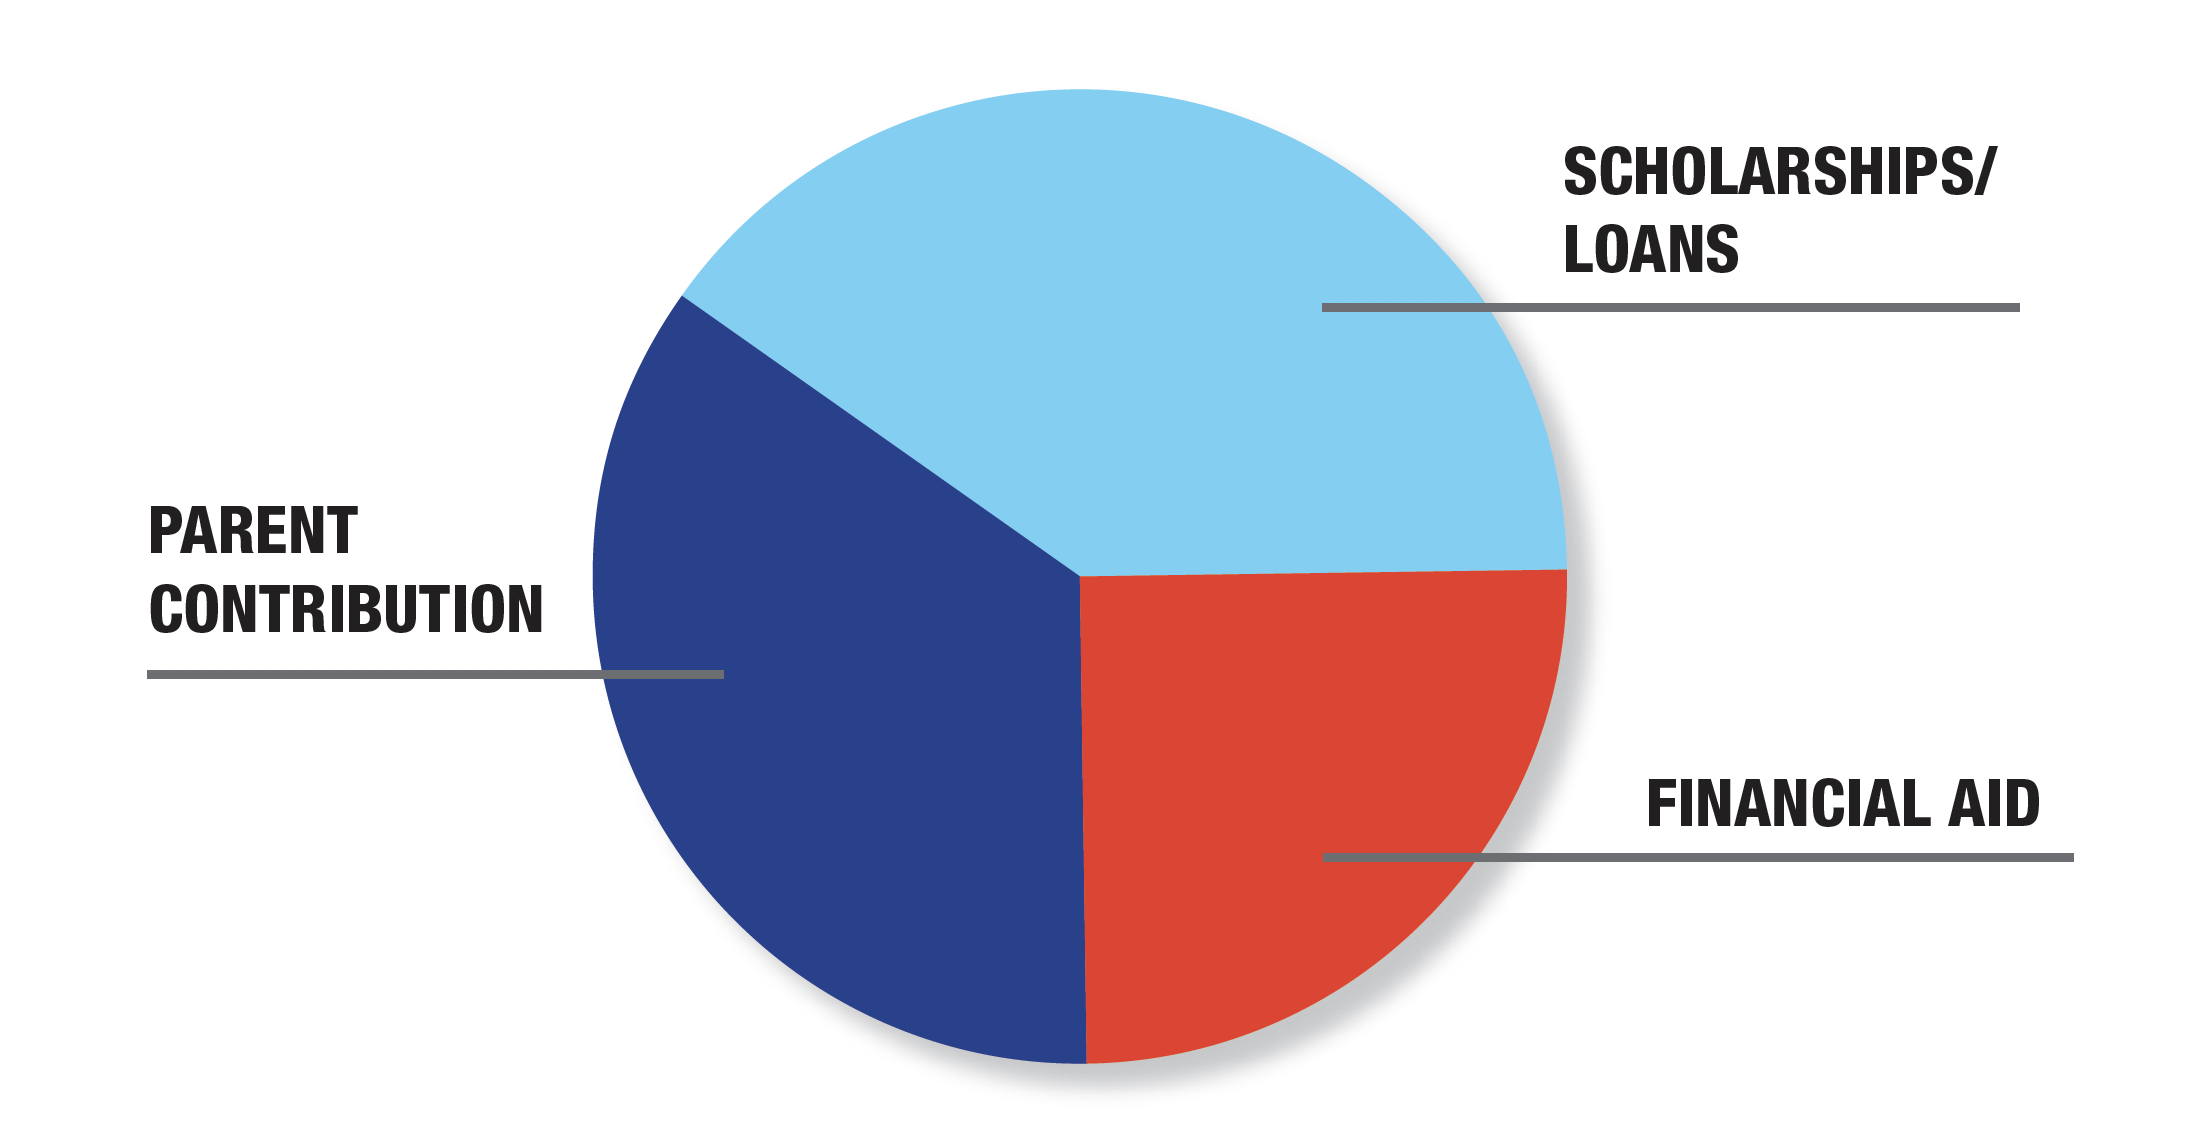 Typical Sources of Tuition Payments